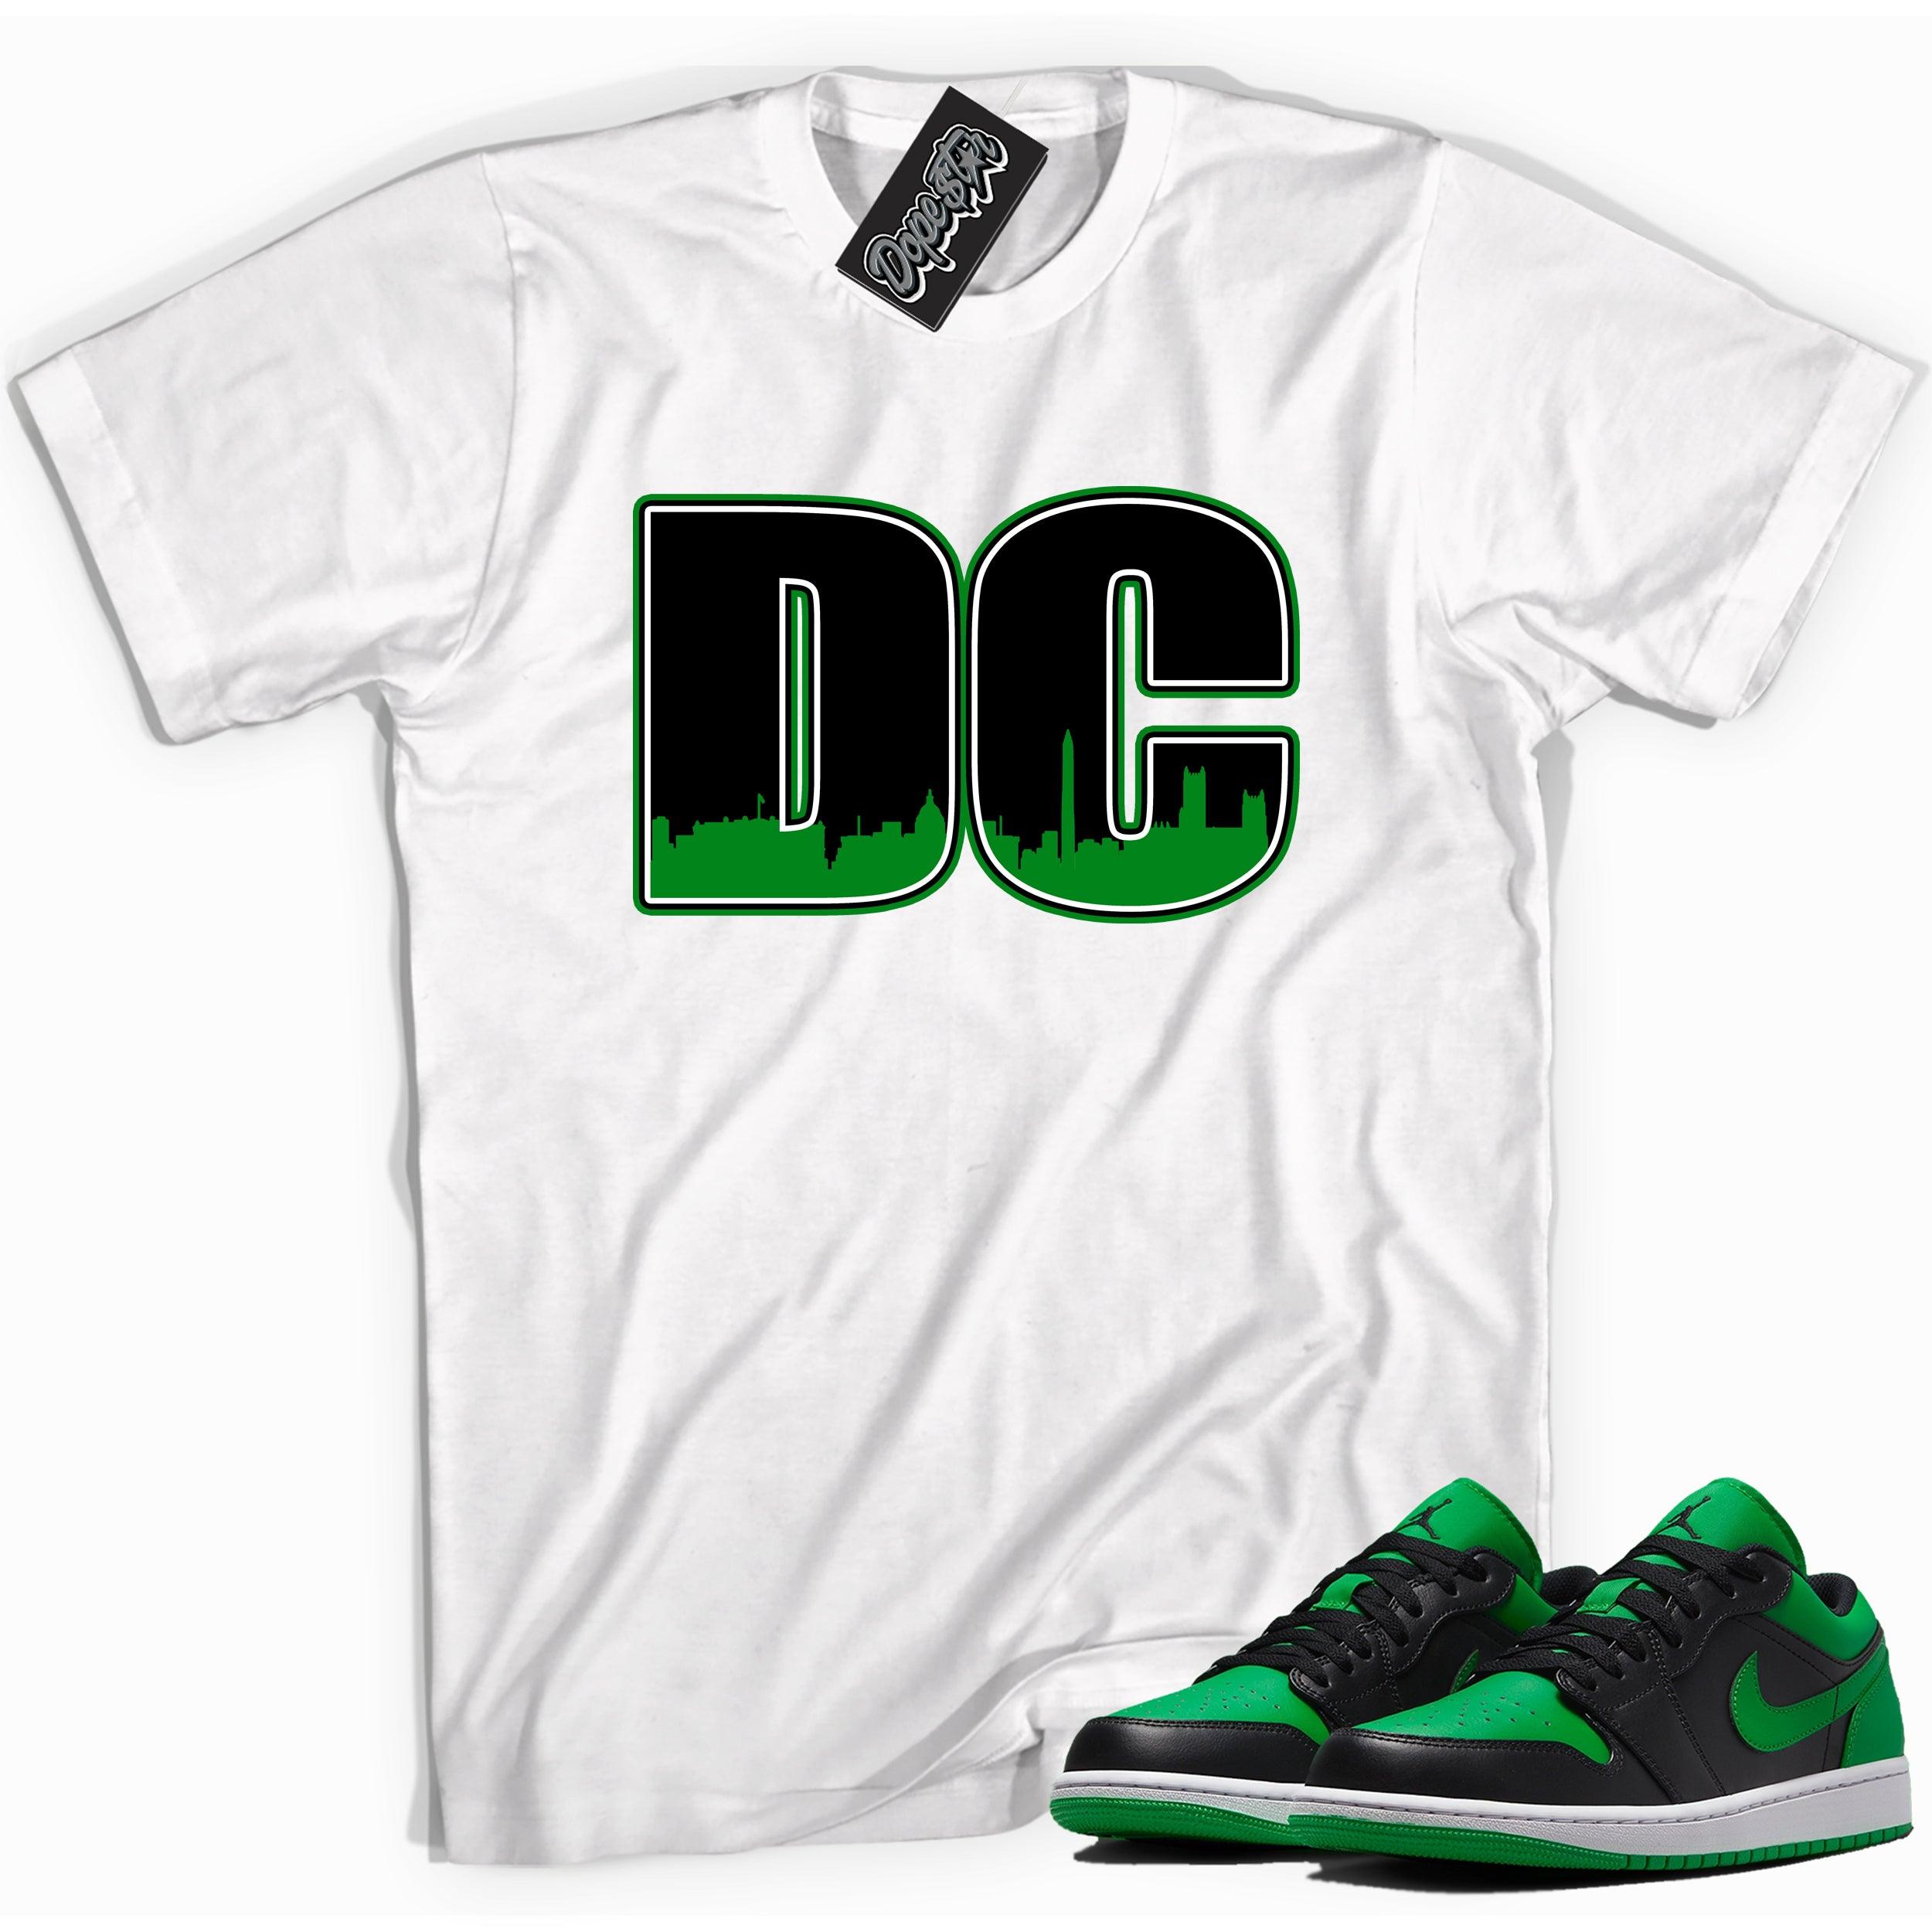 Cool white graphic tee with 'DC' print, that perfectly matches Air Jordan 1 Low Lucky Green sneakers